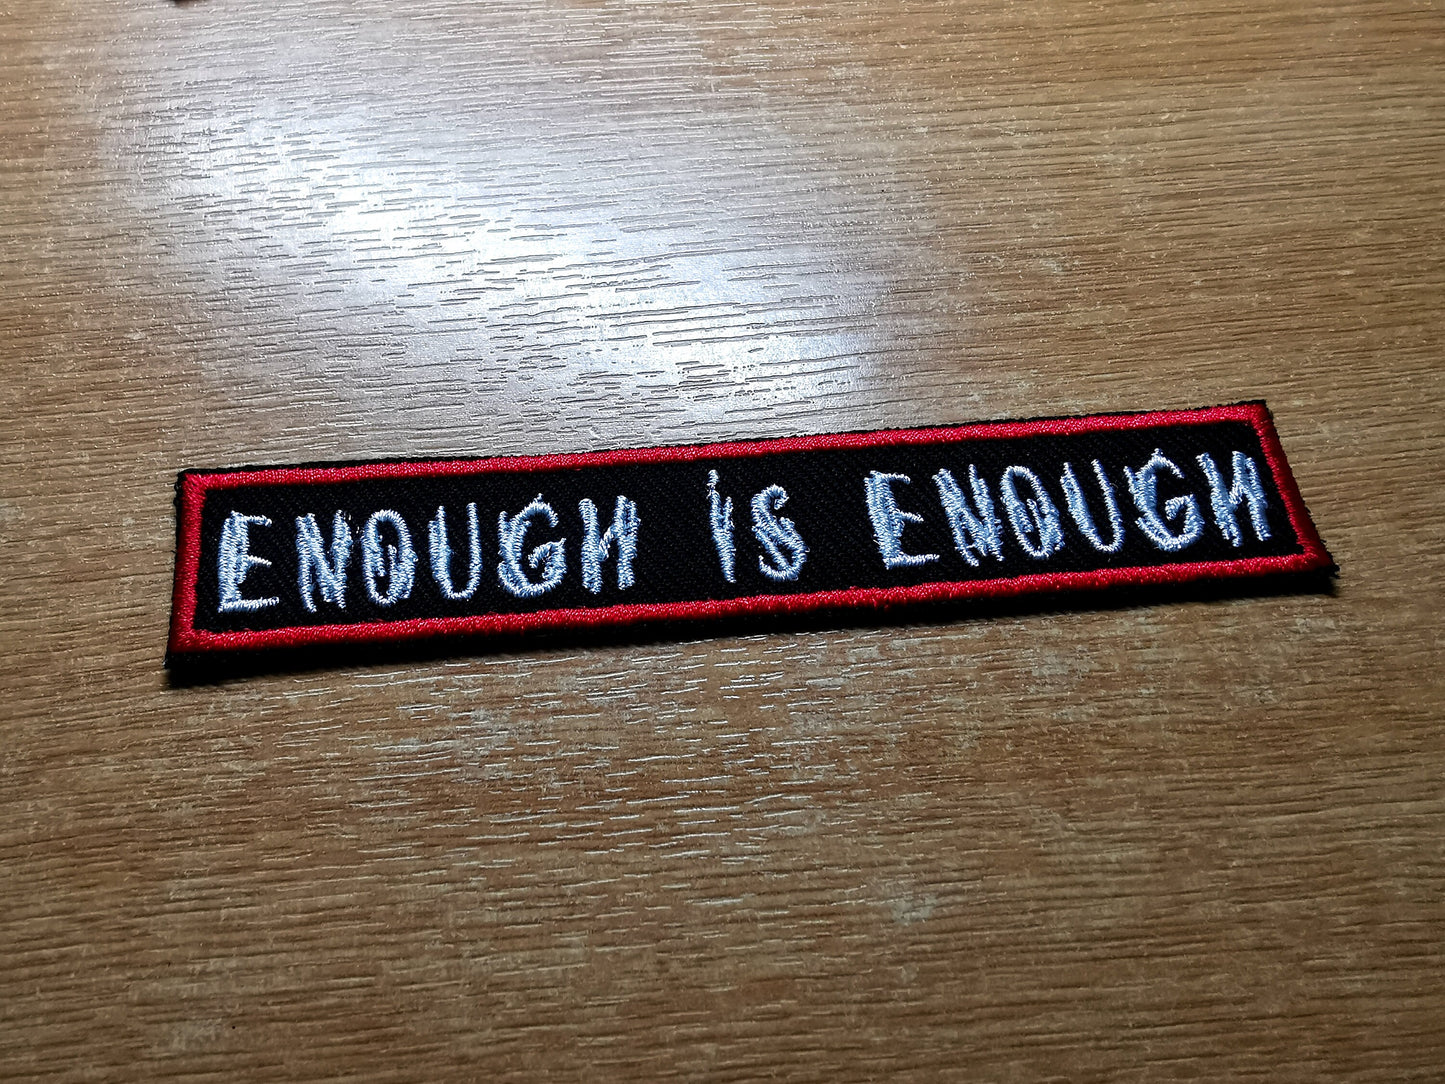 Enough is Enough Campaign Patch Strikers Mick Lynch Sultana Anti Tory Tories Out Labour Left Wing Corbyn Climate Rebellion